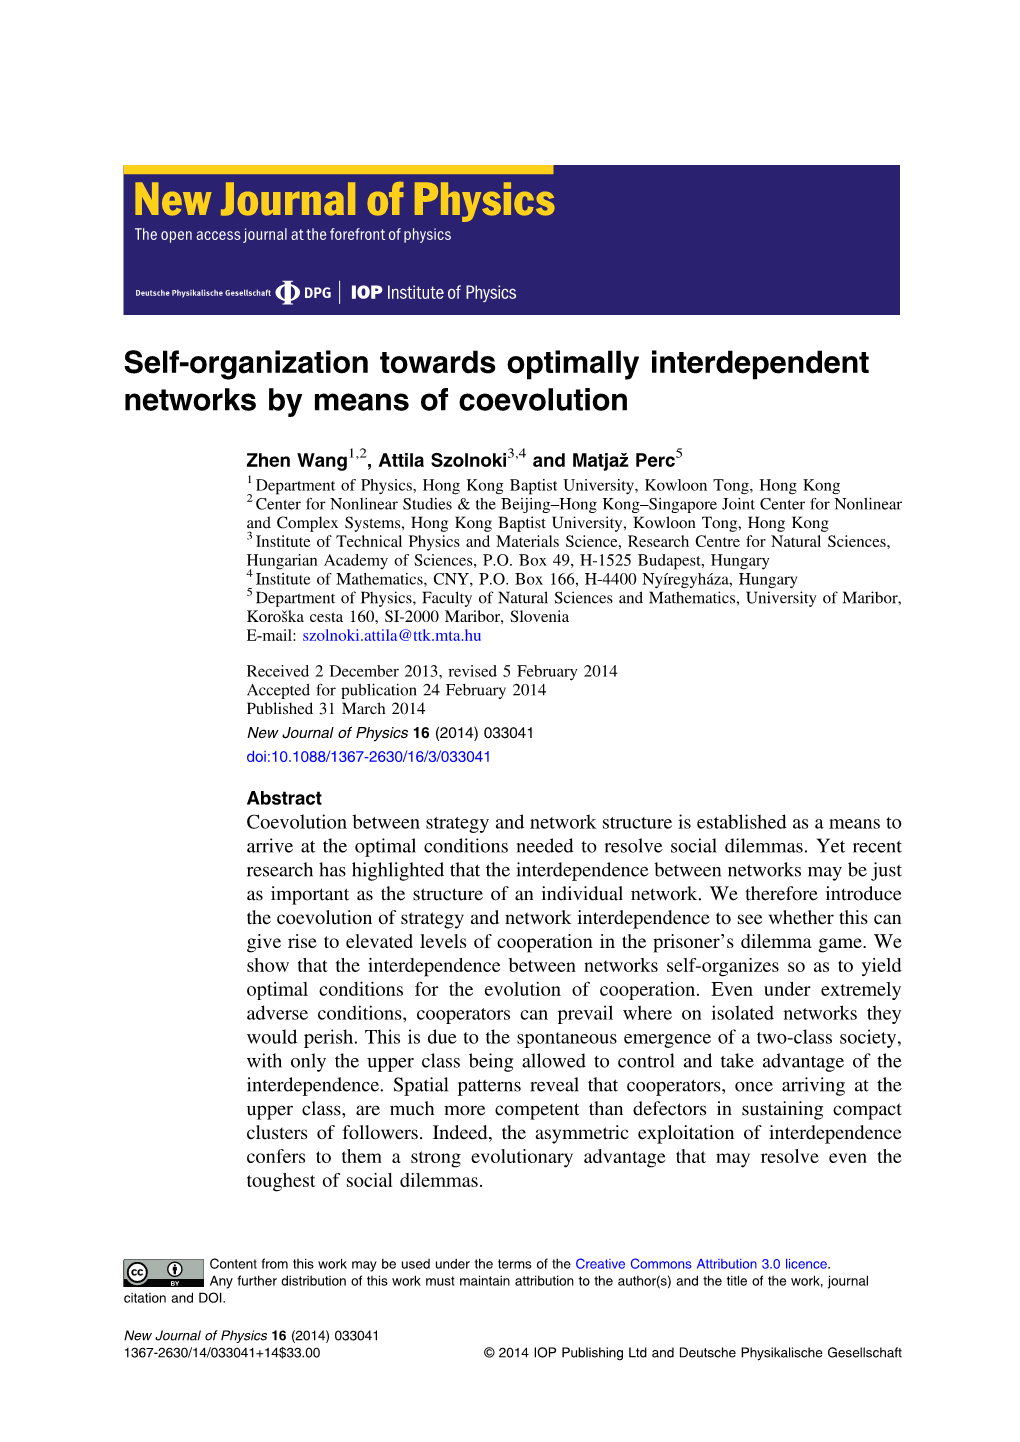 Self-Organization Towards Optimally Interdependent Networks by Means of Coevolution